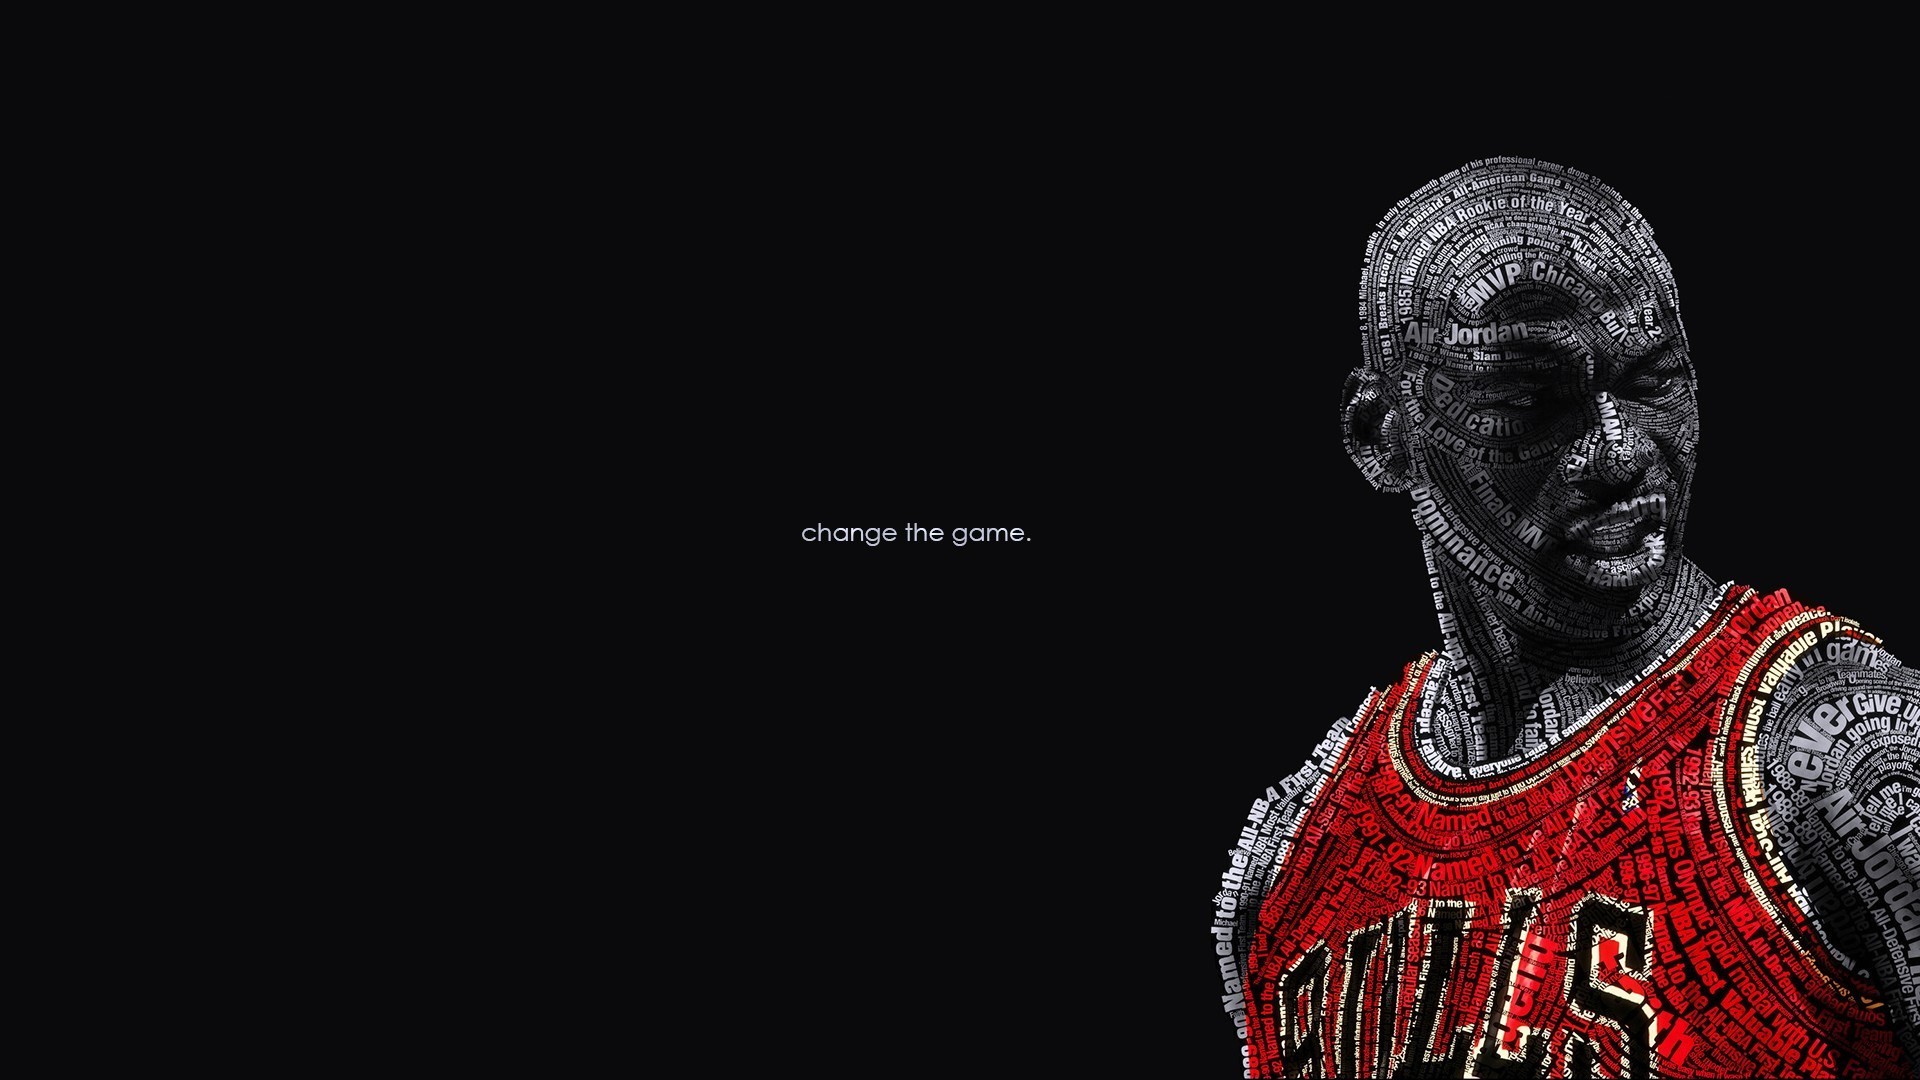 1920x1080 basketball desktop background pictures free